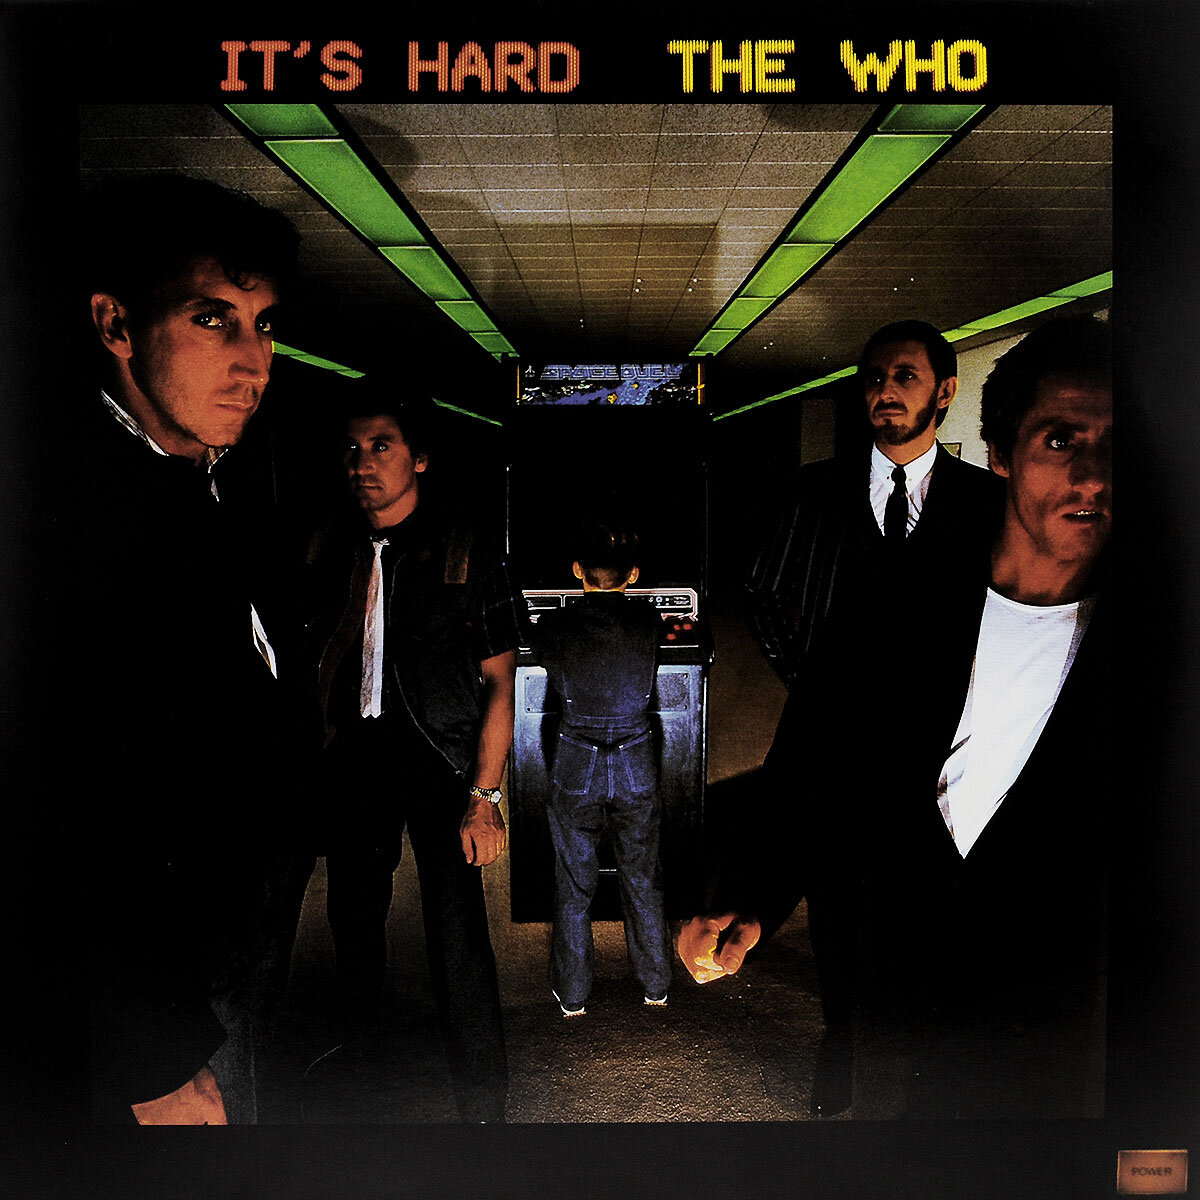 Who can it be now mp3. The who it's hard 1982 обложка. Who. The who face Dances 1981. Who перевод.